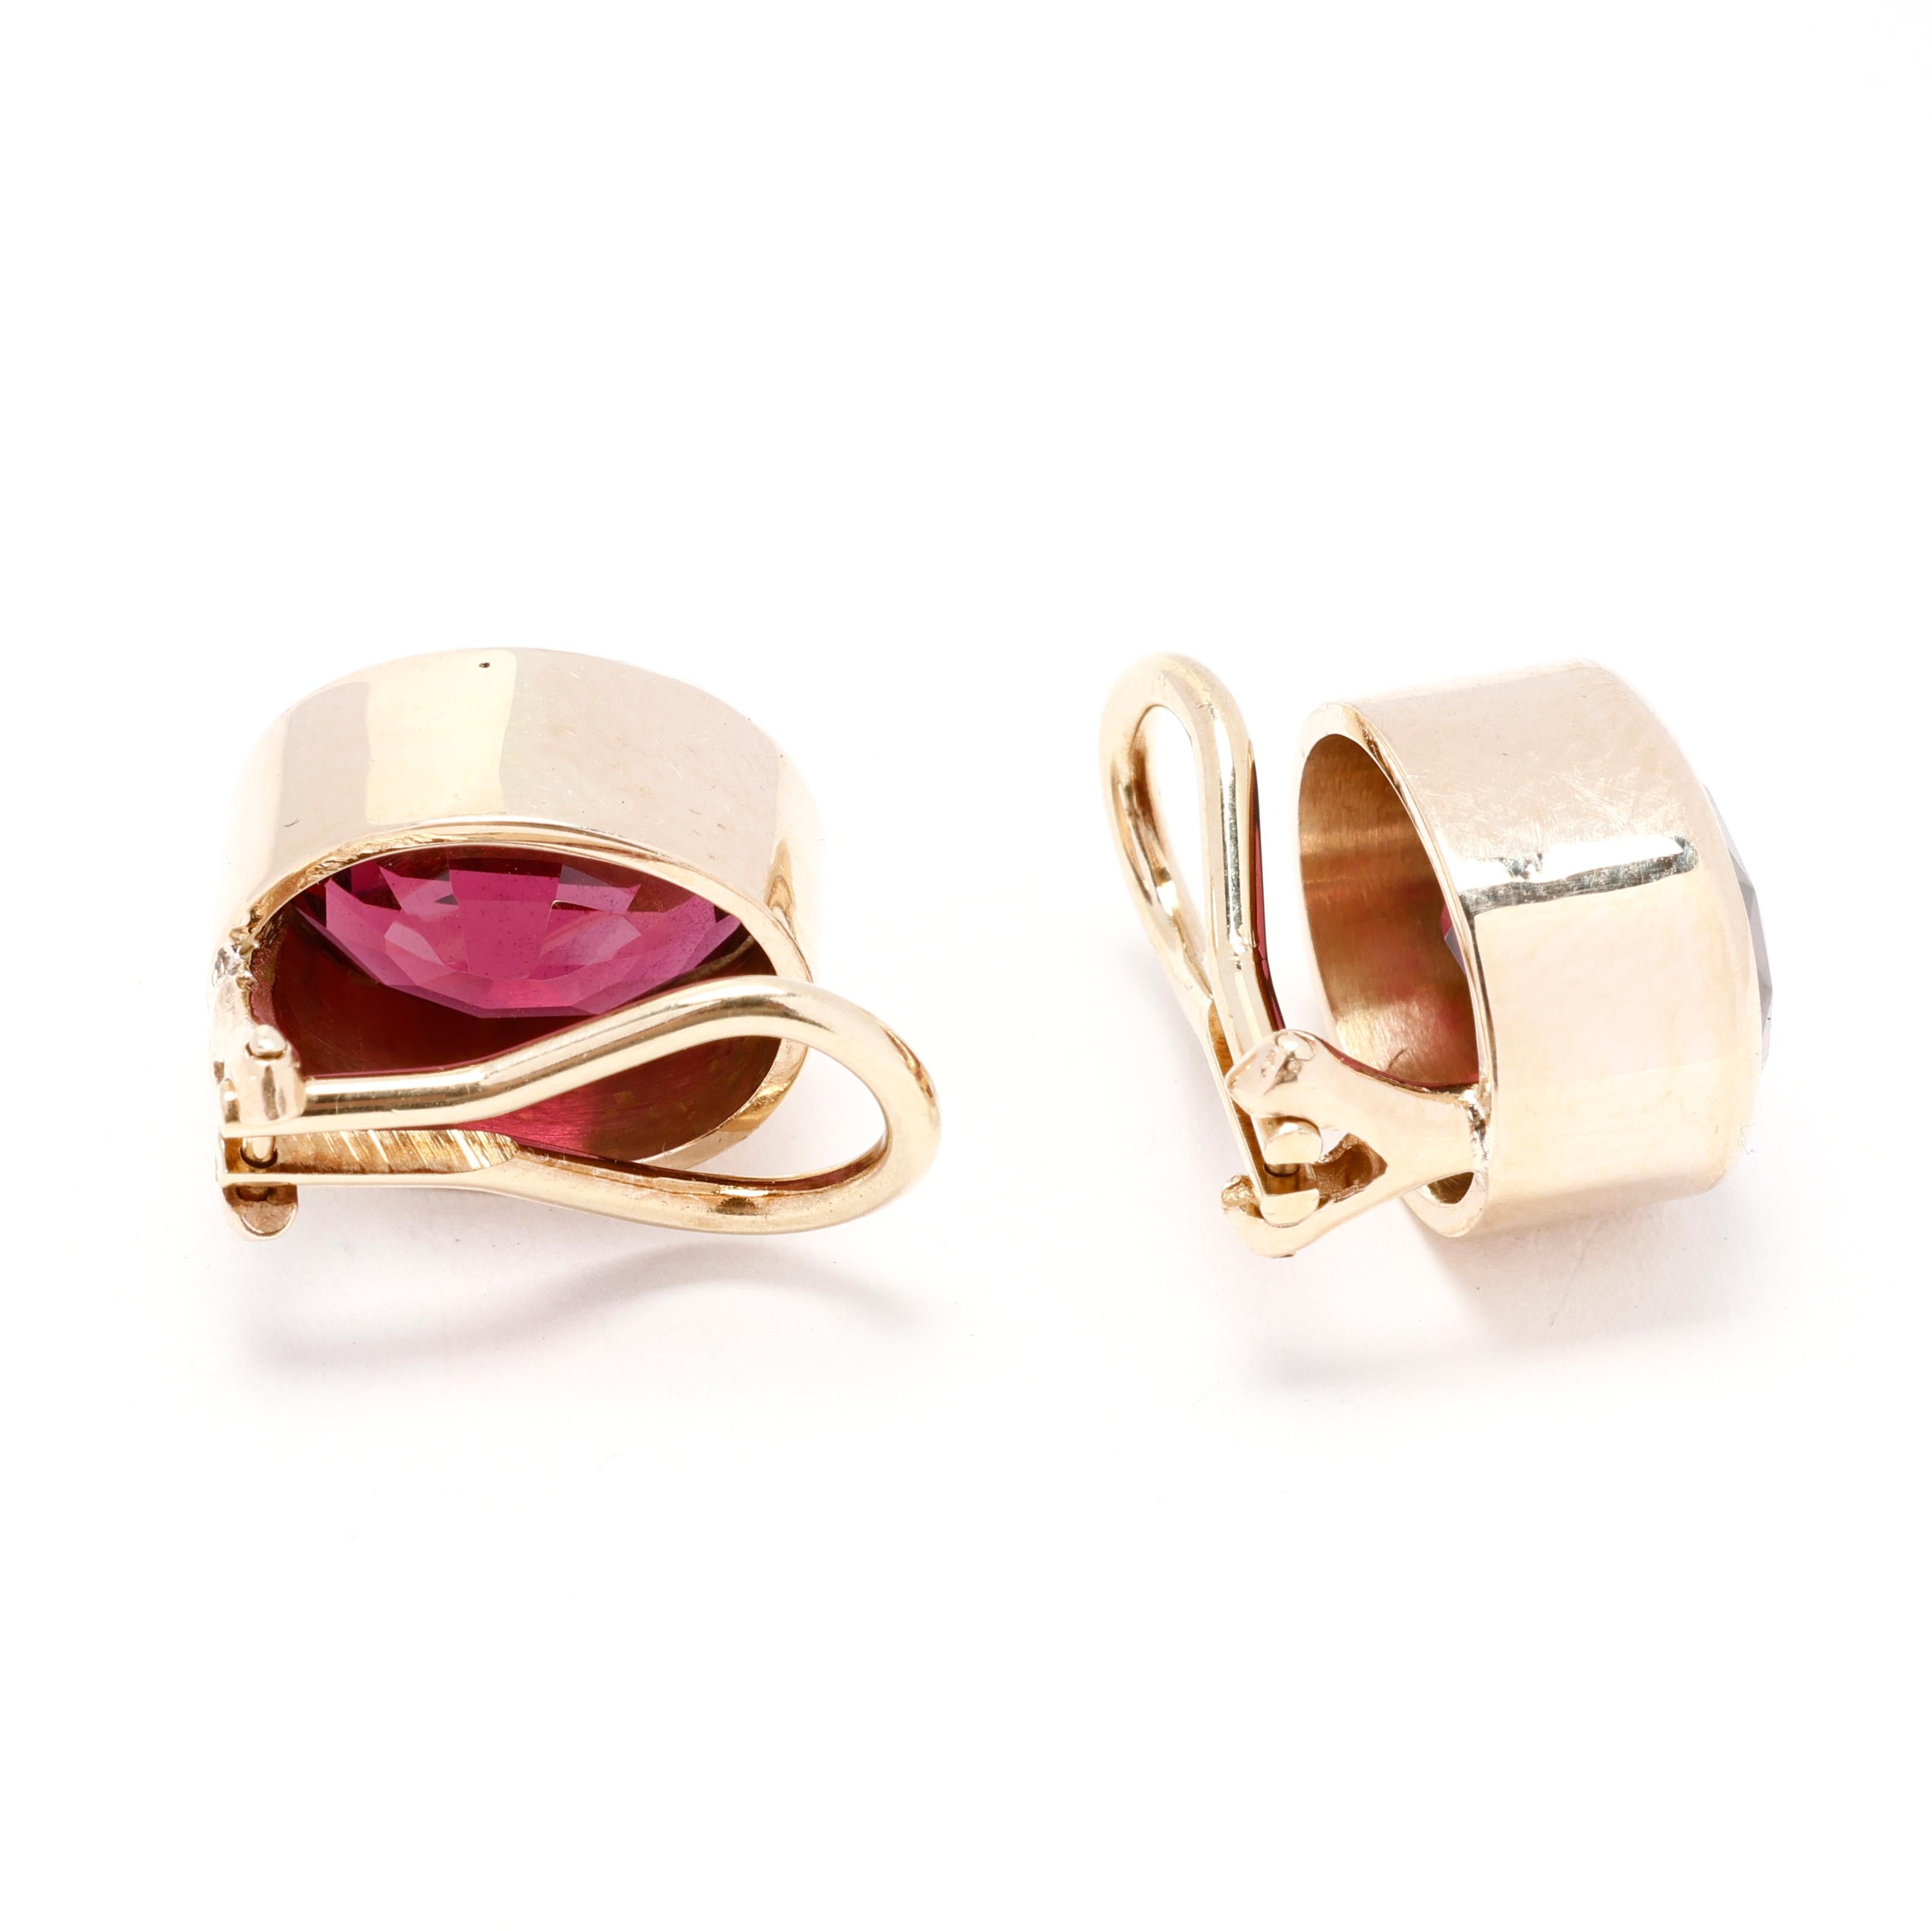 Make a bold statement with these stunning 8.4ctw Rhodolite Garnet Clip-On Earrings. Crafted in luxurious 14k yellow gold, these eye-catching earrings feature vibrant rhodolite garnets that showcase a deep, rich hue, making them a standout accessory